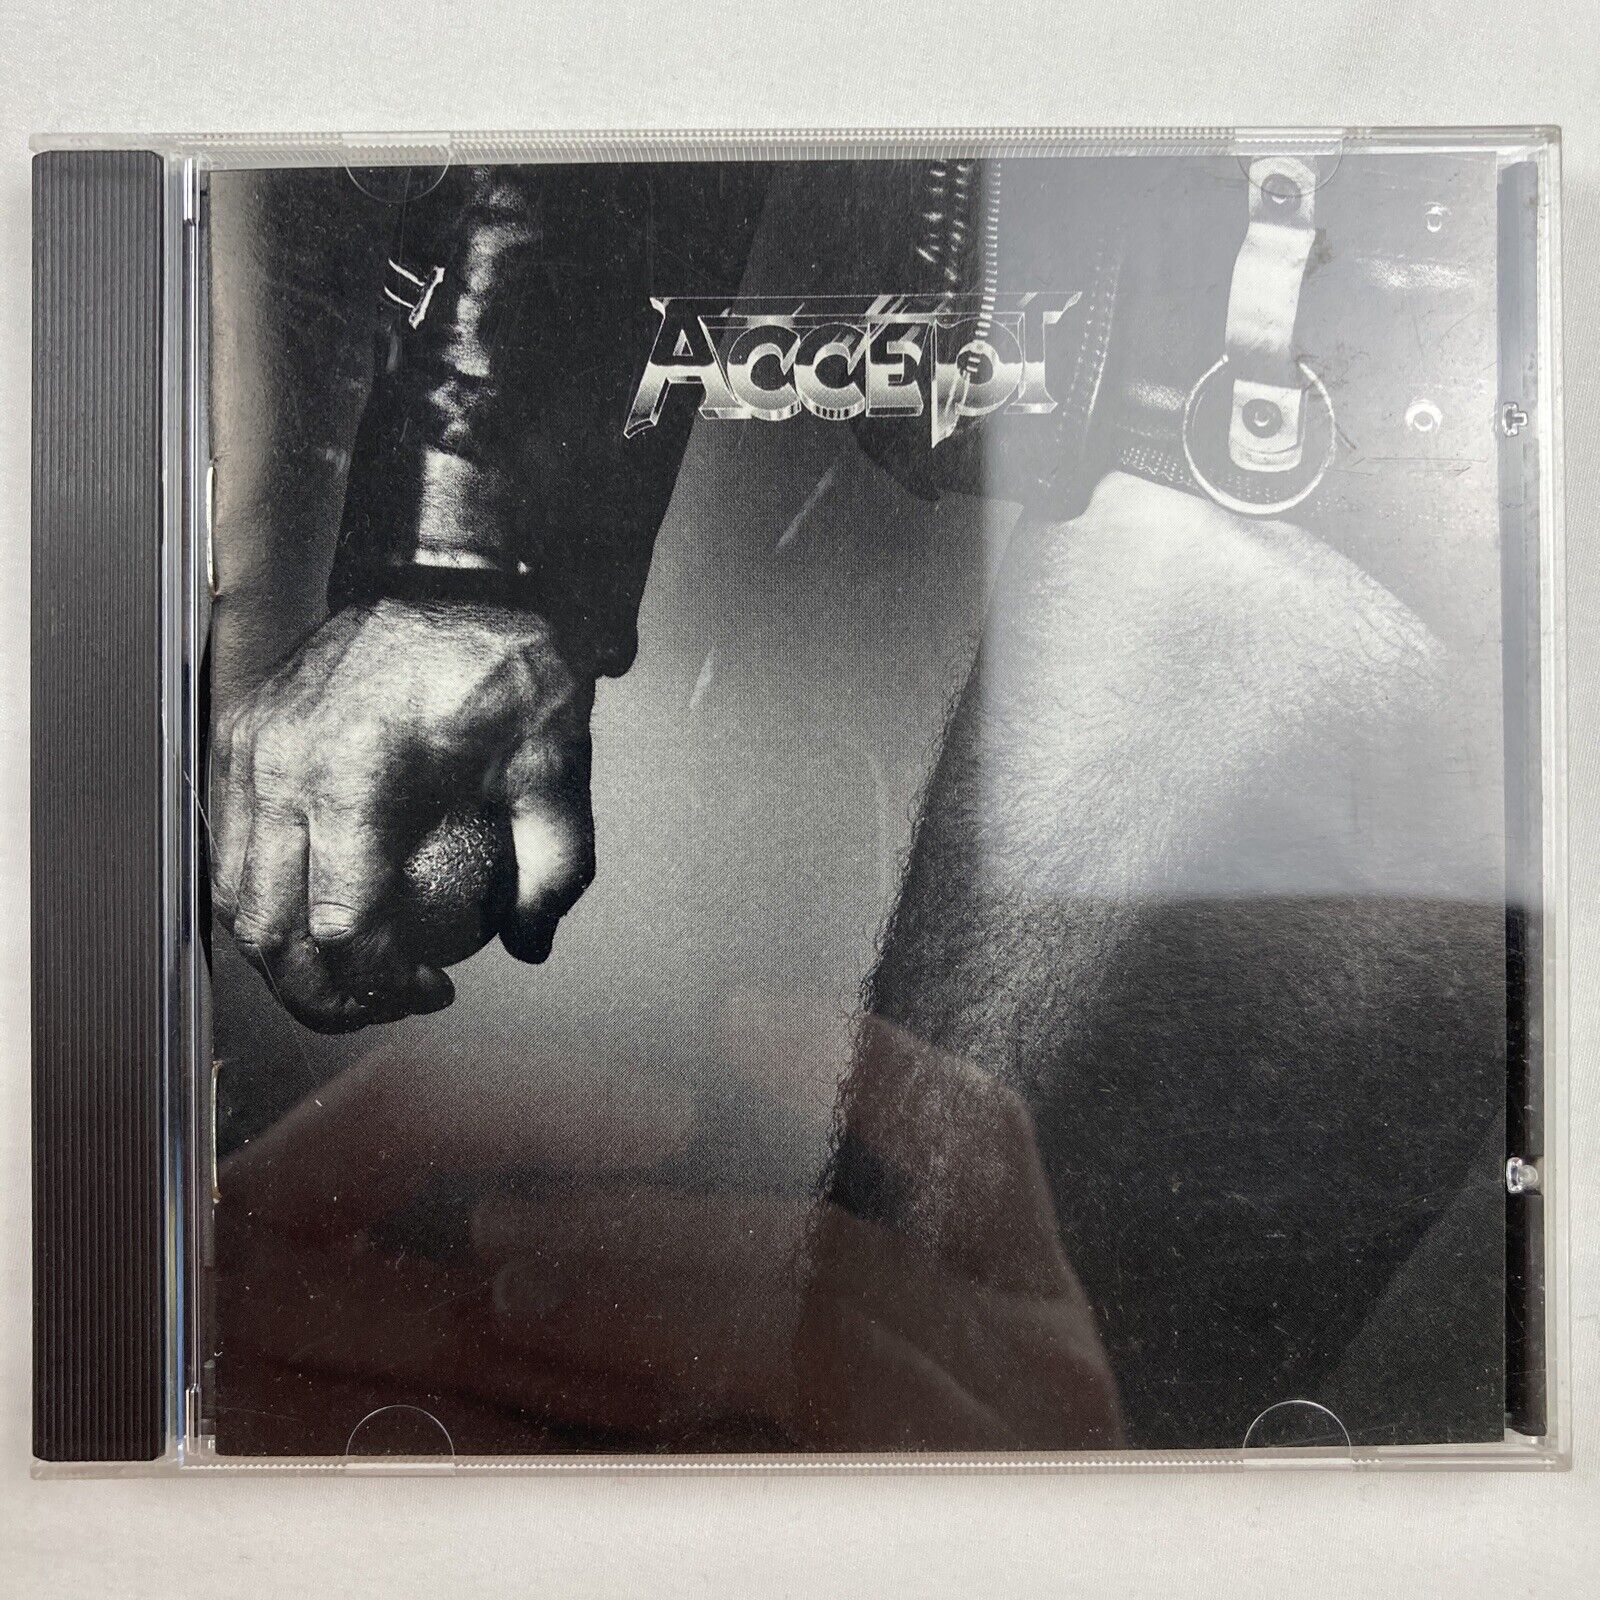 Balls to the Wall by Accept (CD, Apr-1995, Epic)